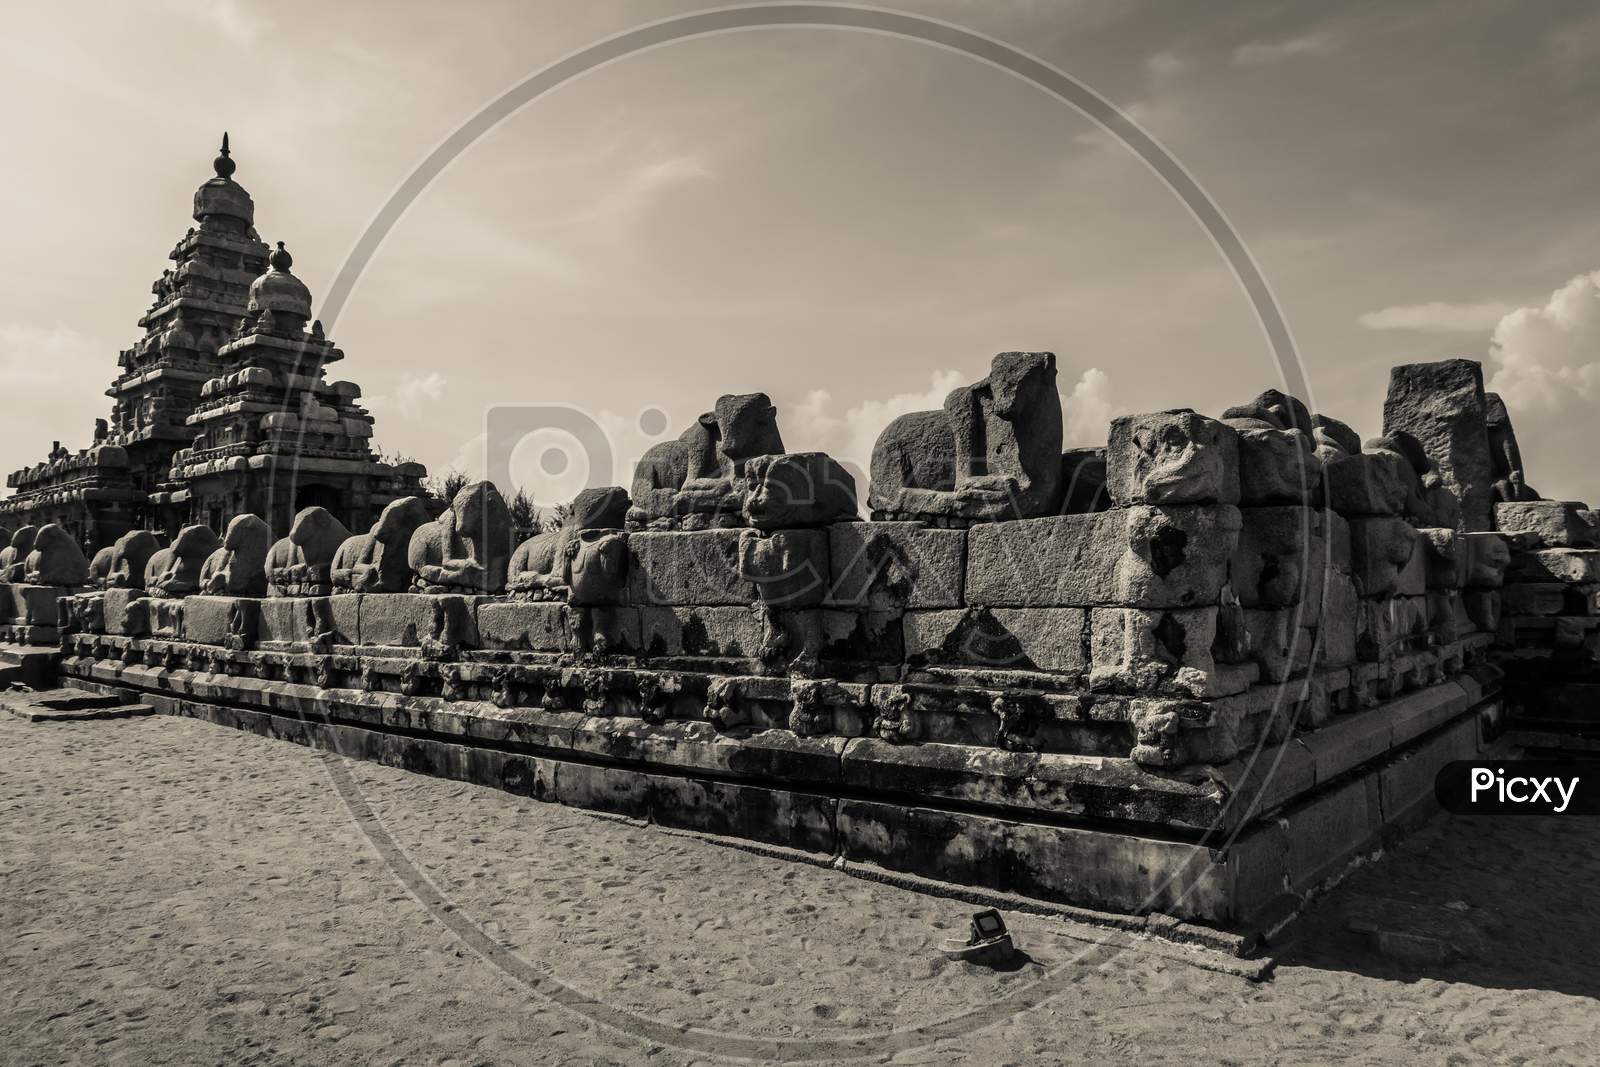 Very Old and Rare Ancient Pictures Of Shore temple is UNESCO's World Heritage Site located at Mamallapuram, or Mahabalipuram in Tamil Nadu, South India